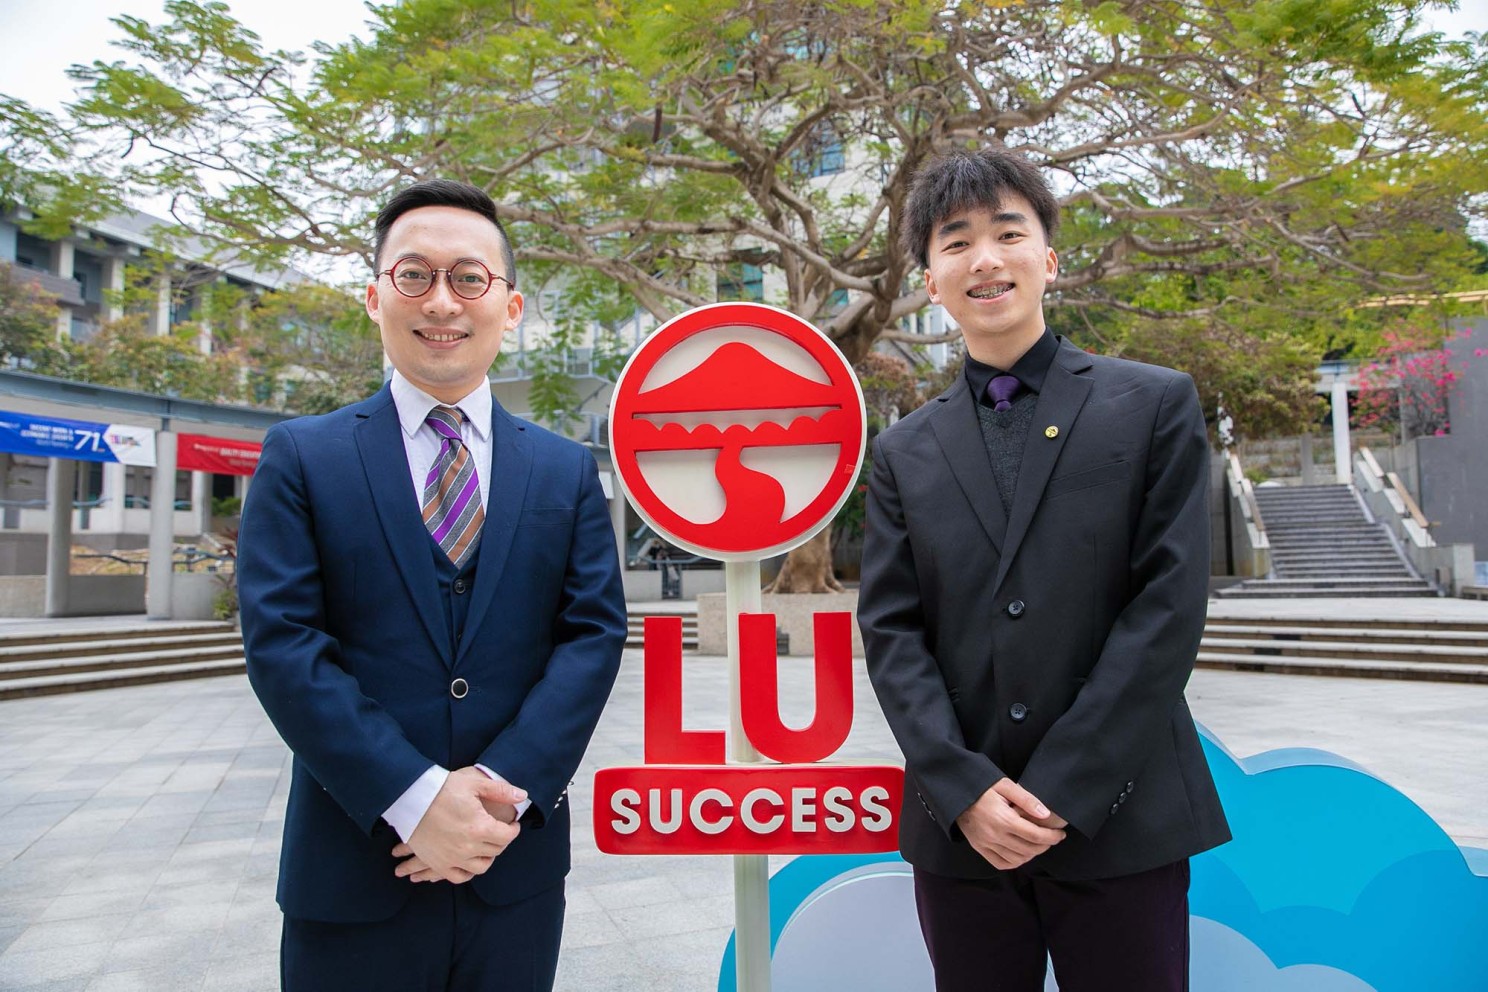 LU team wins three awards in Qi Yue Recitation Arts Festival and National College Students Recitation Conference